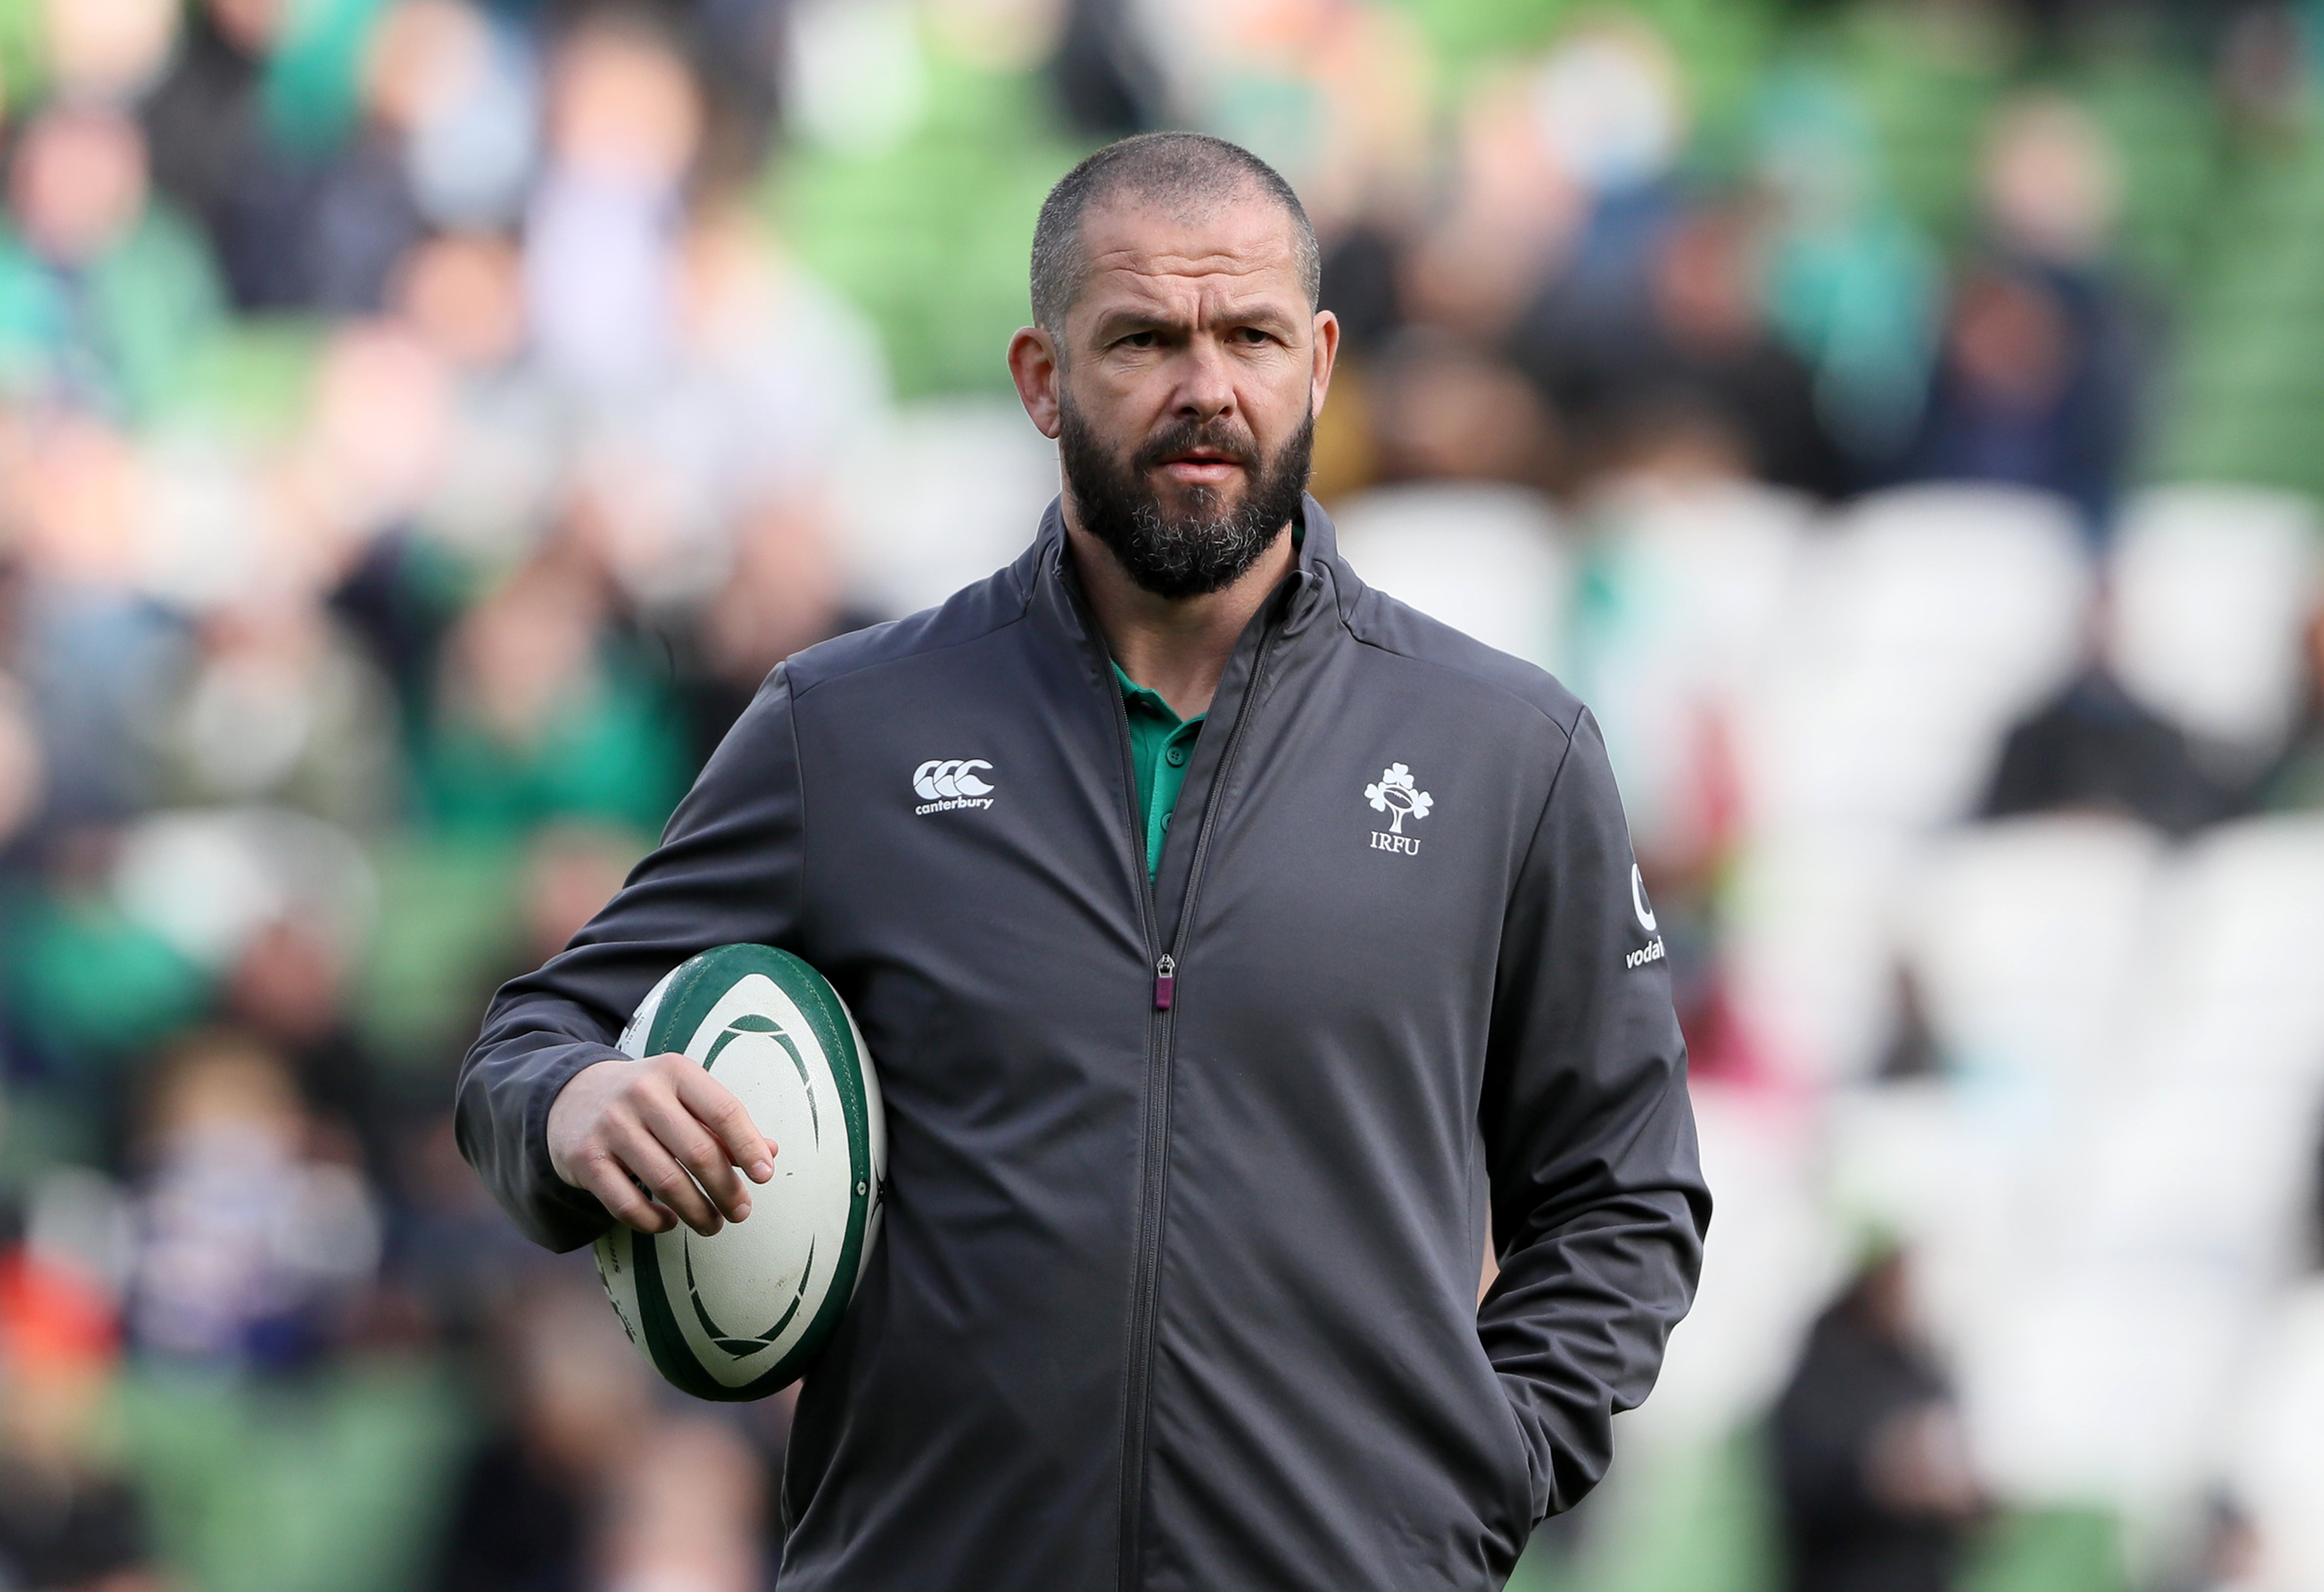 Andy Farrell has won 13 of his 18 matches as Ireland head coach (Brian Lawless/PA)